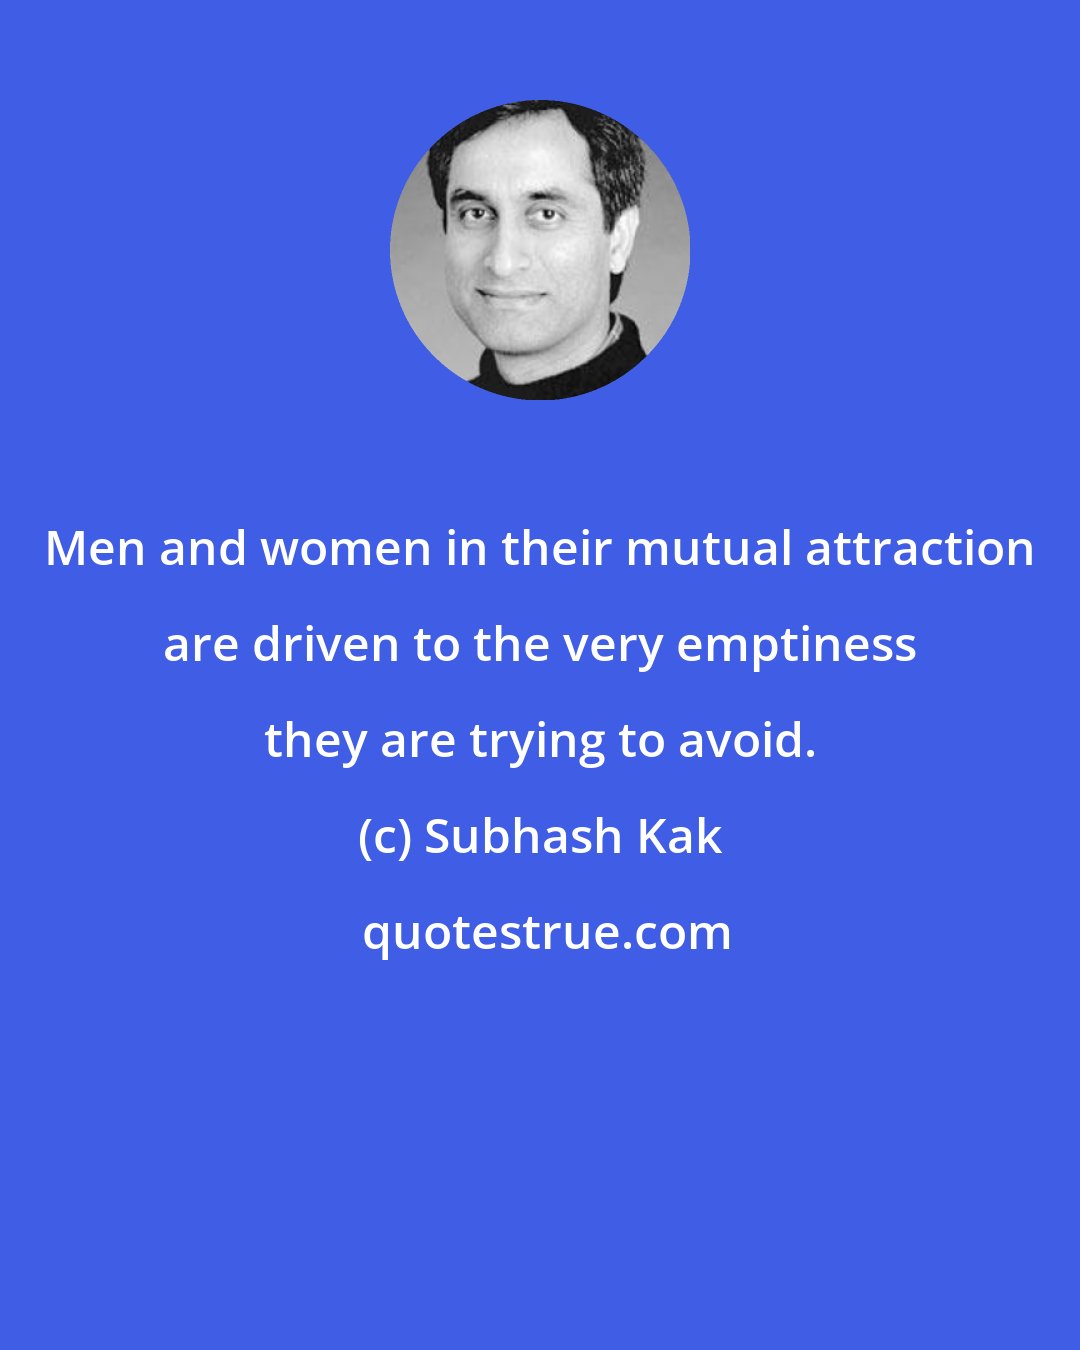 Subhash Kak: Men and women in their mutual attraction are driven to the very emptiness they are trying to avoid.